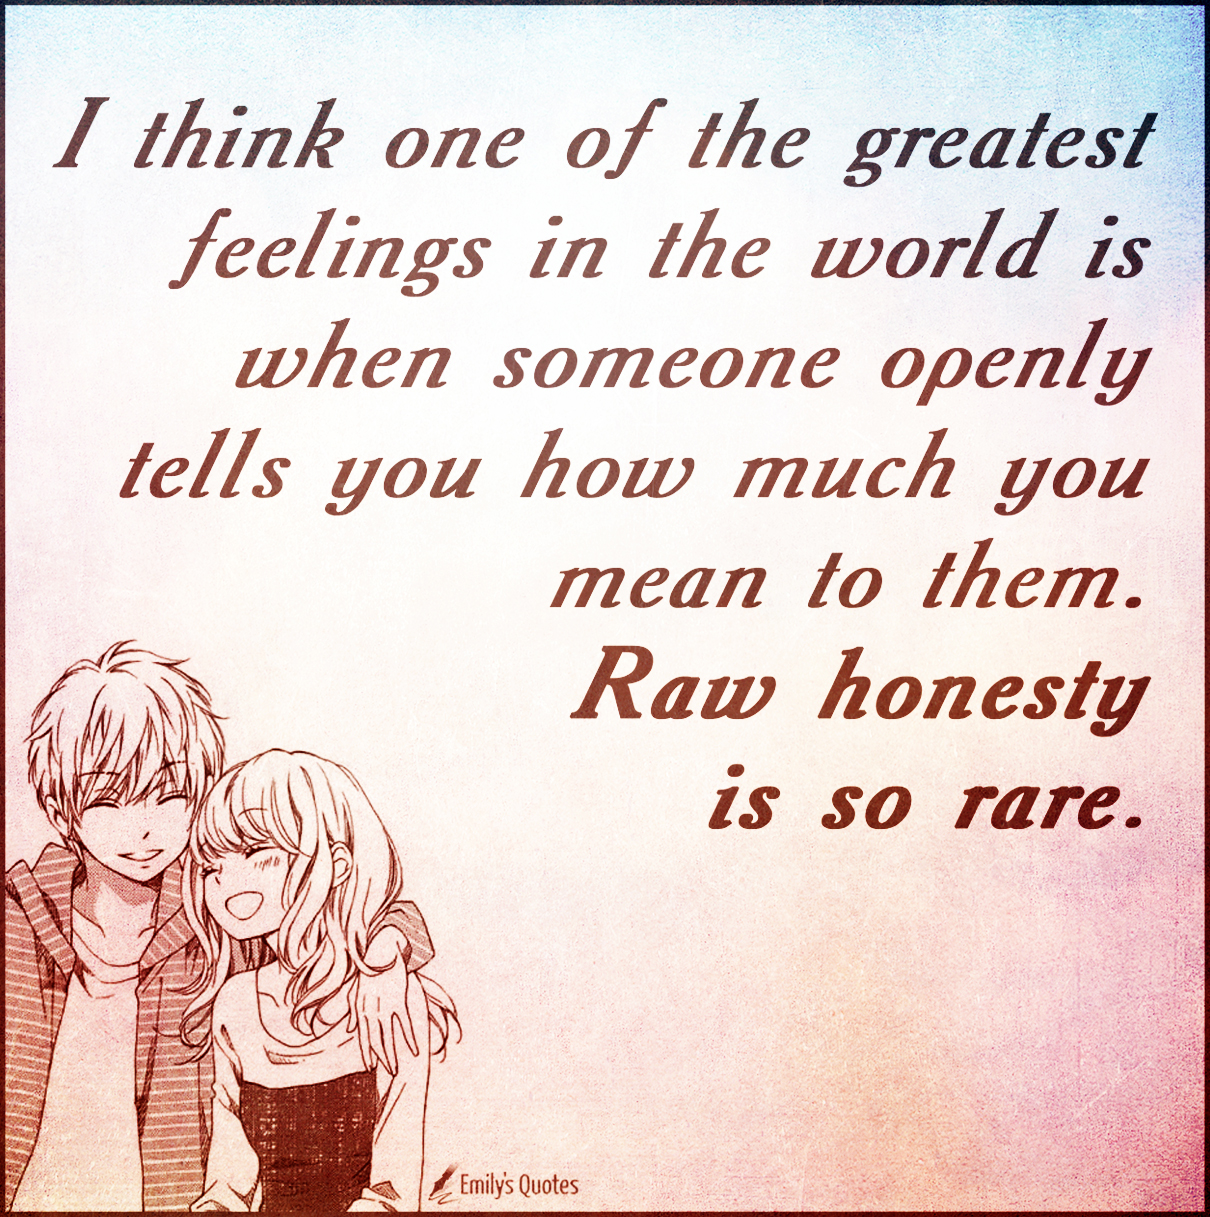 I think one of the greatest feelings in the world is when someone openly